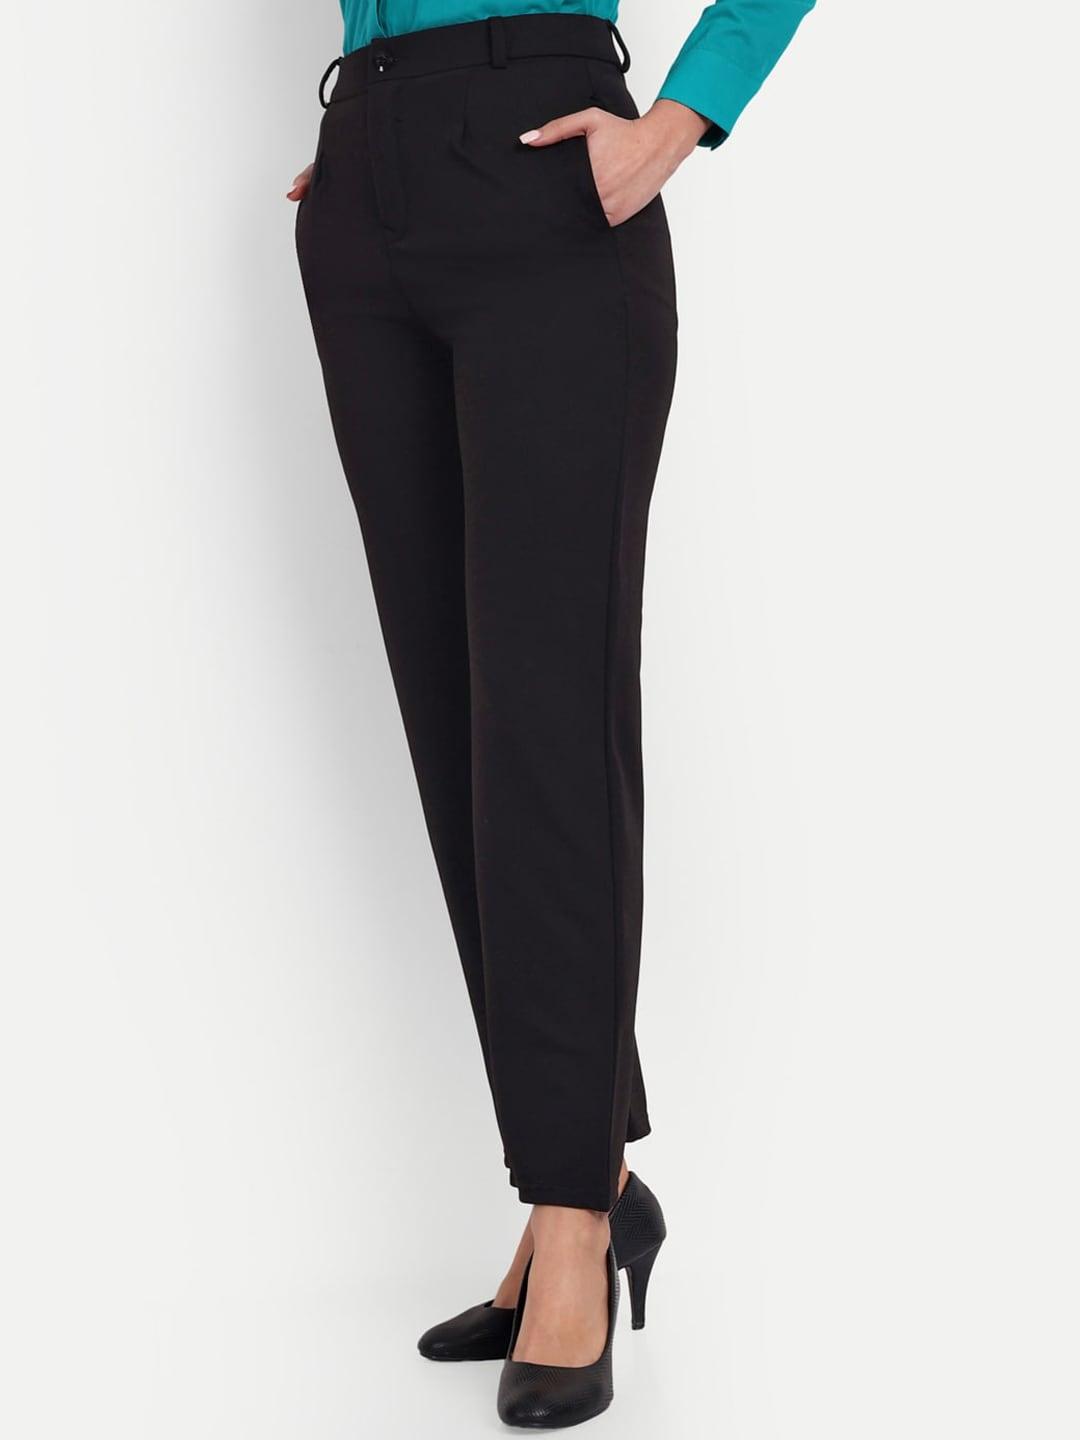 Next One Women Black Classic Straight Fit High-Rise Easy Wash Trousers